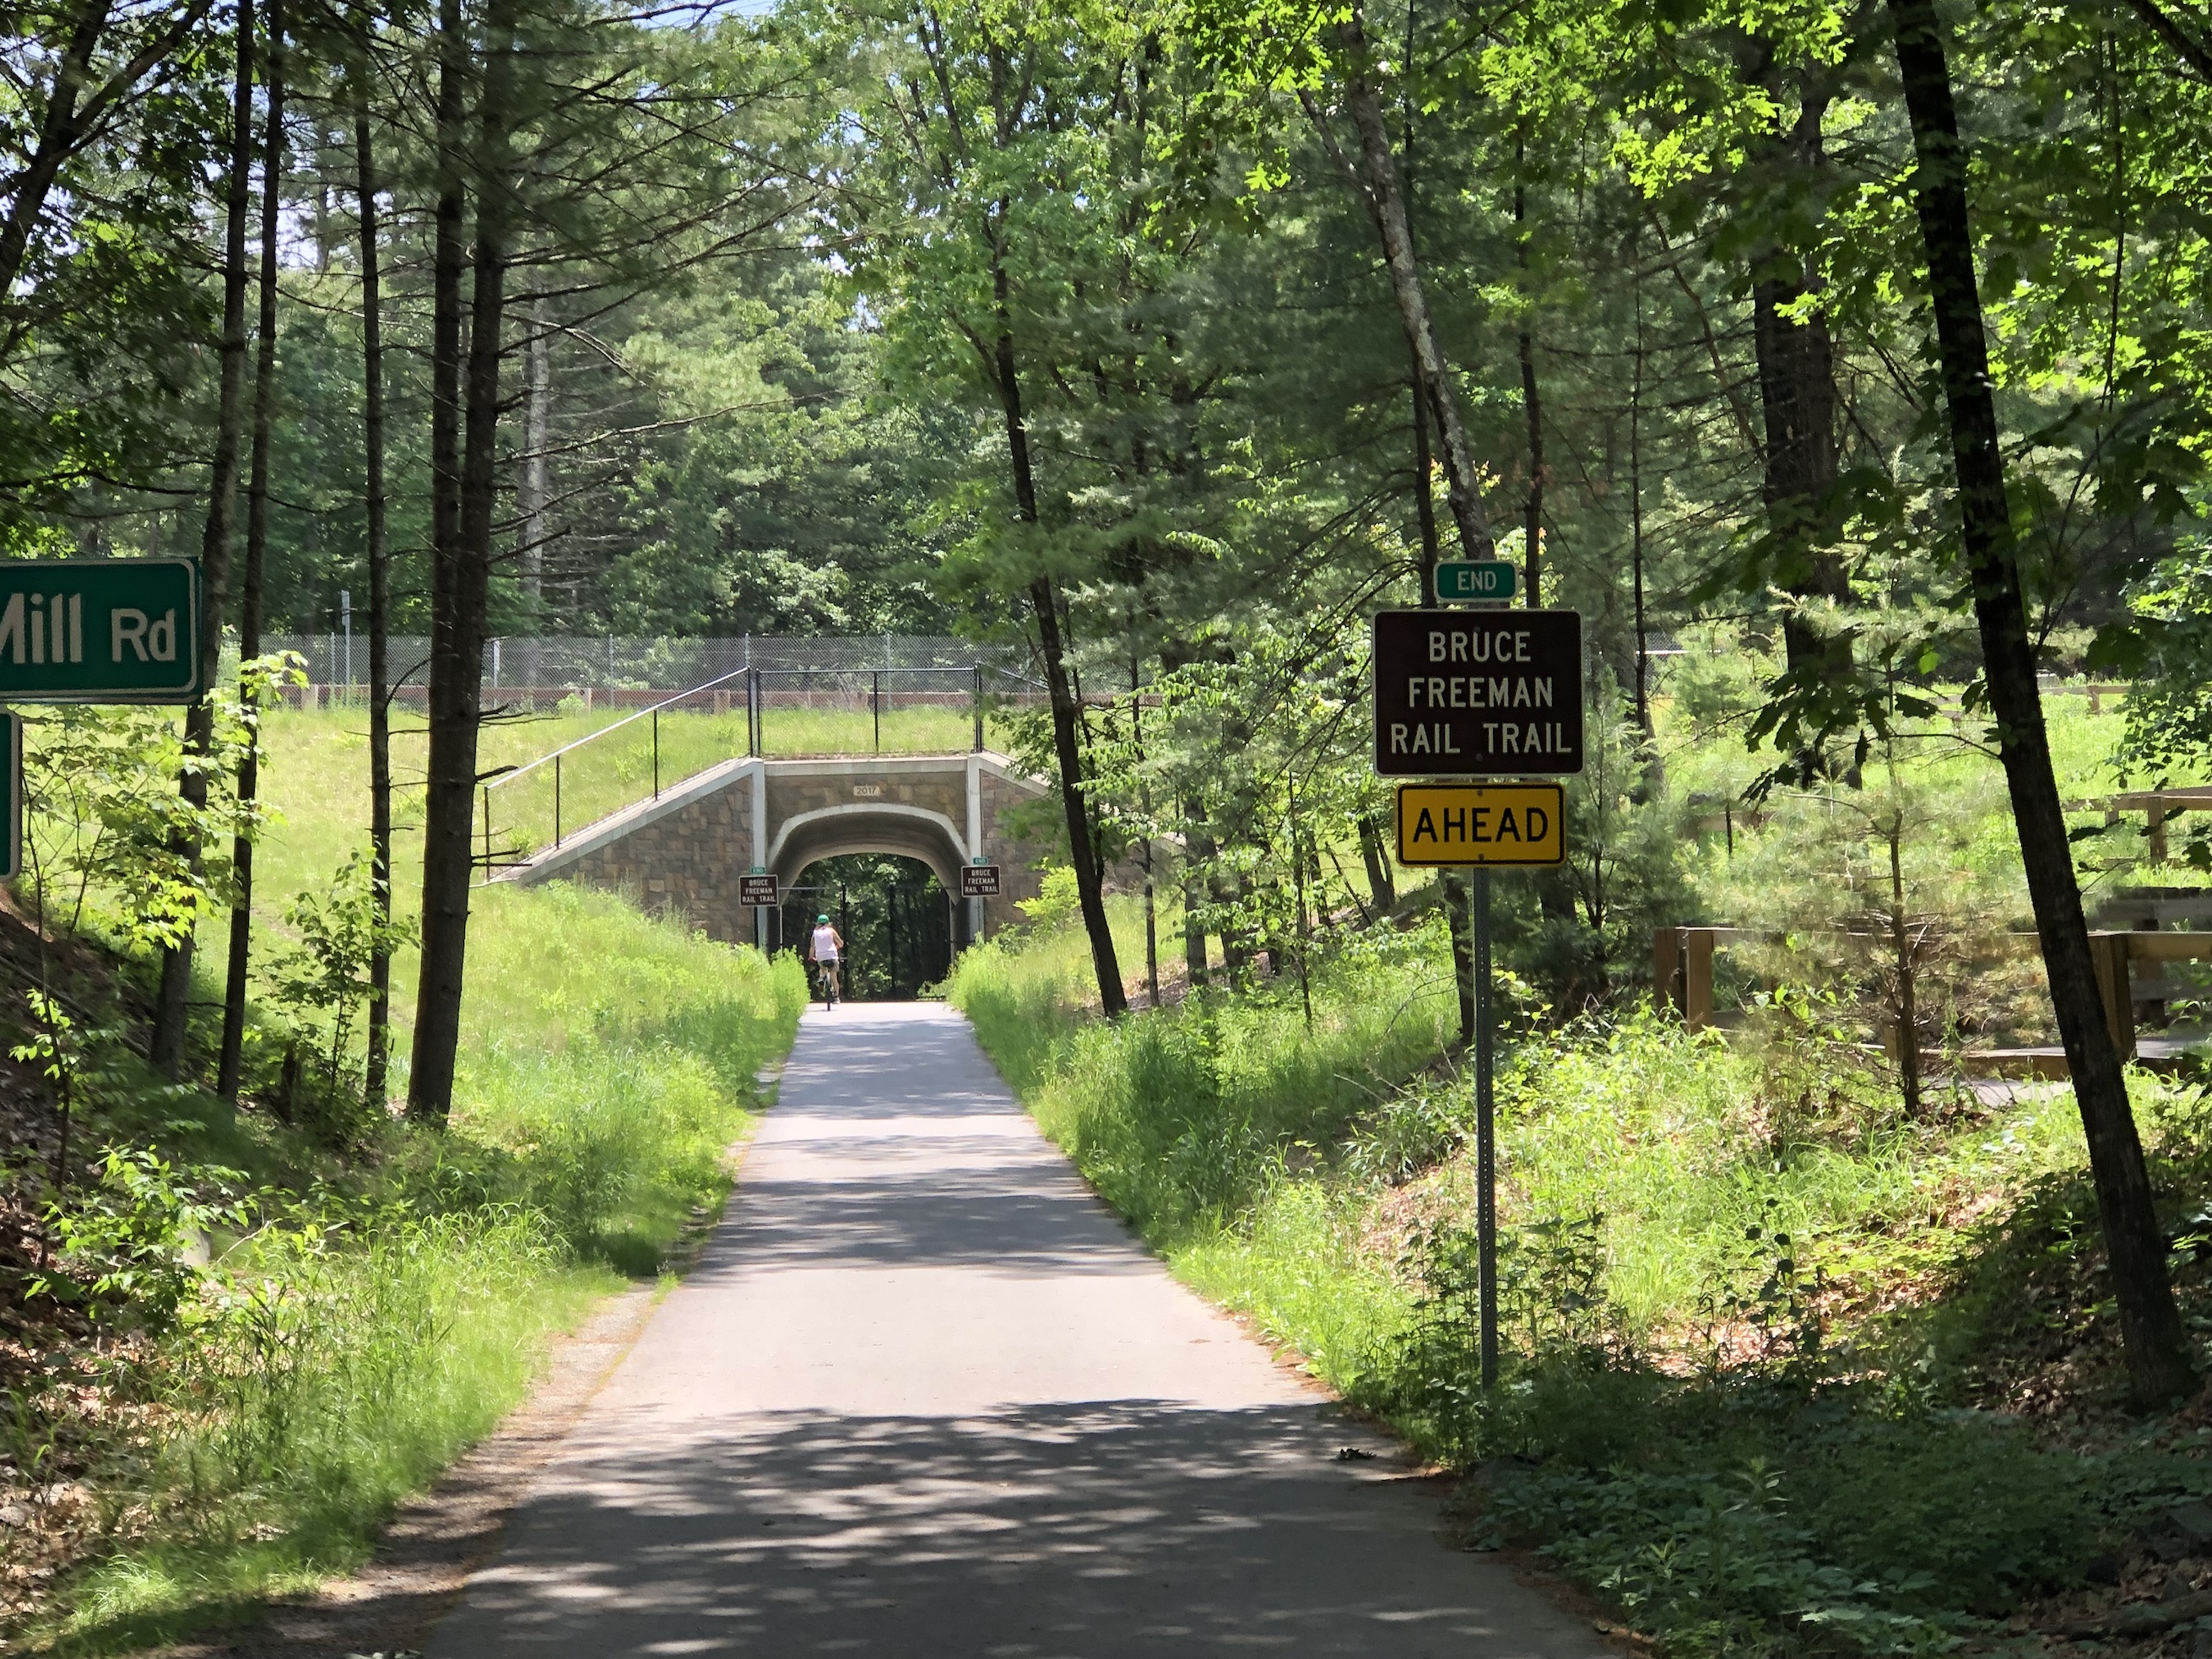 A trail though leafy woods leads to a tunnel under a roadway in the middle distance. Three signs stacked vertically on a signpost next to the trail in the foreground read "End / Bruce Freeman Rail Trail / Ahead"